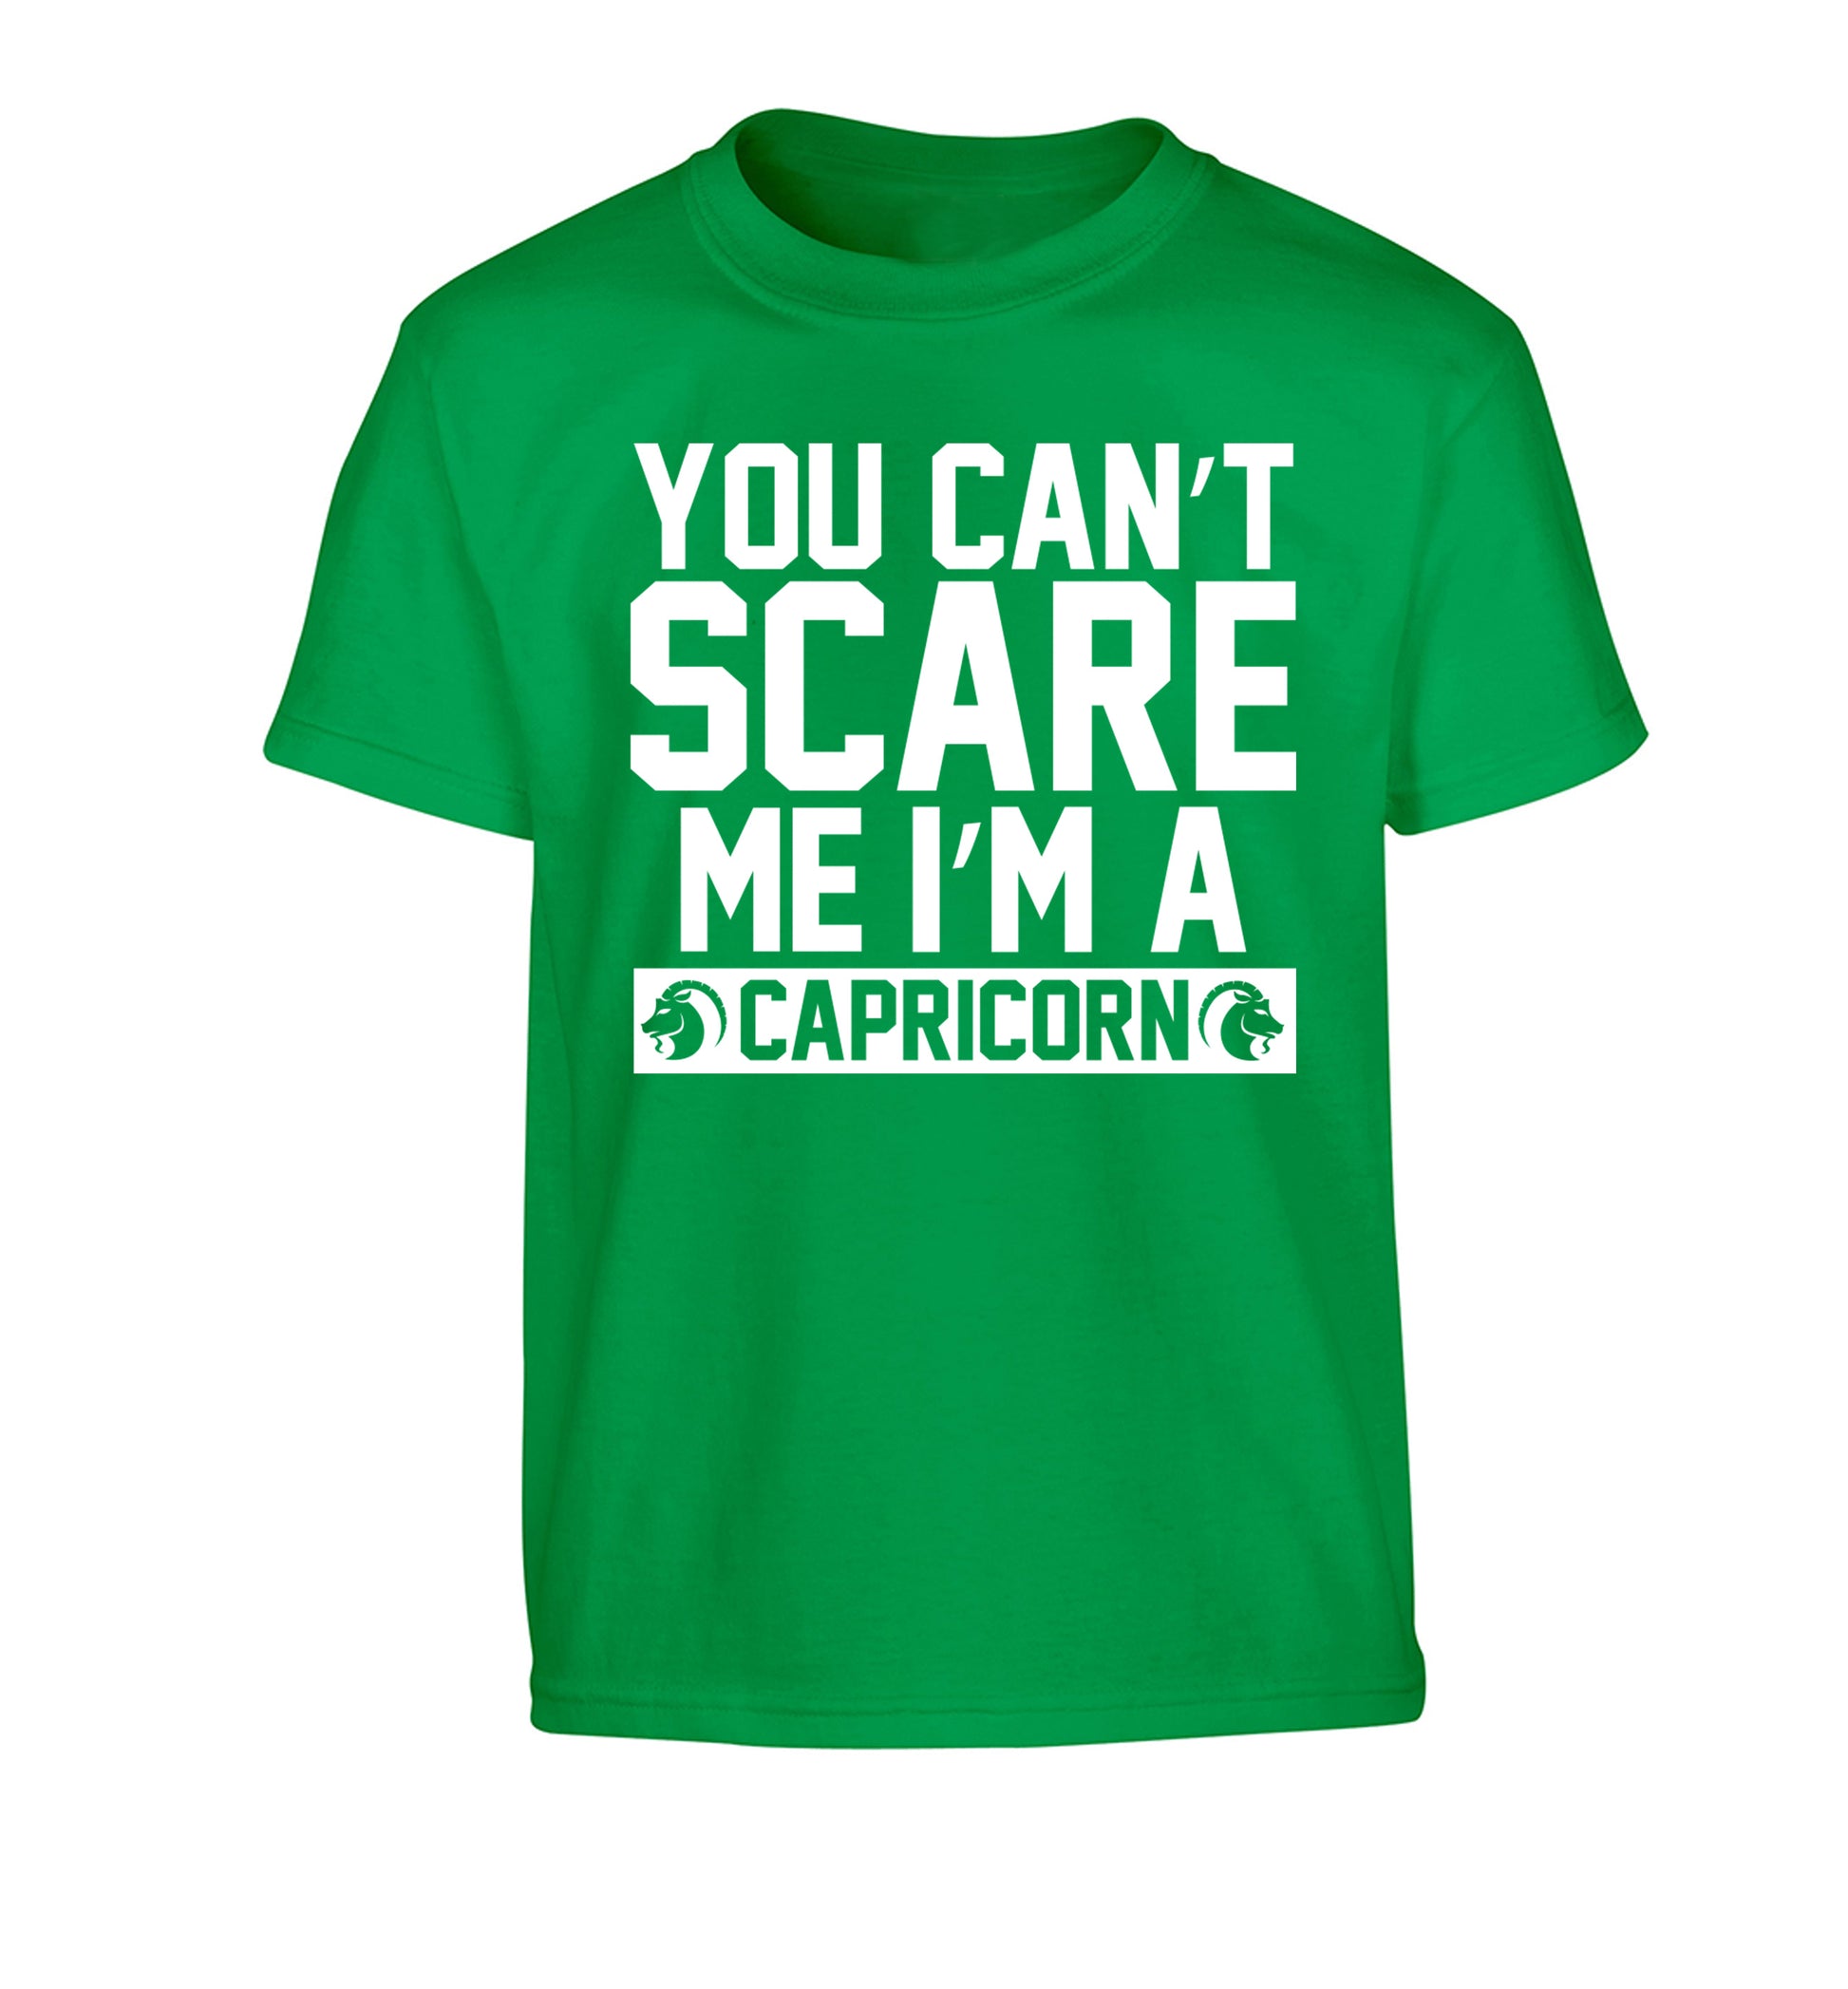 You can't scare me I'm a capricorn Children's green Tshirt 12-13 Years